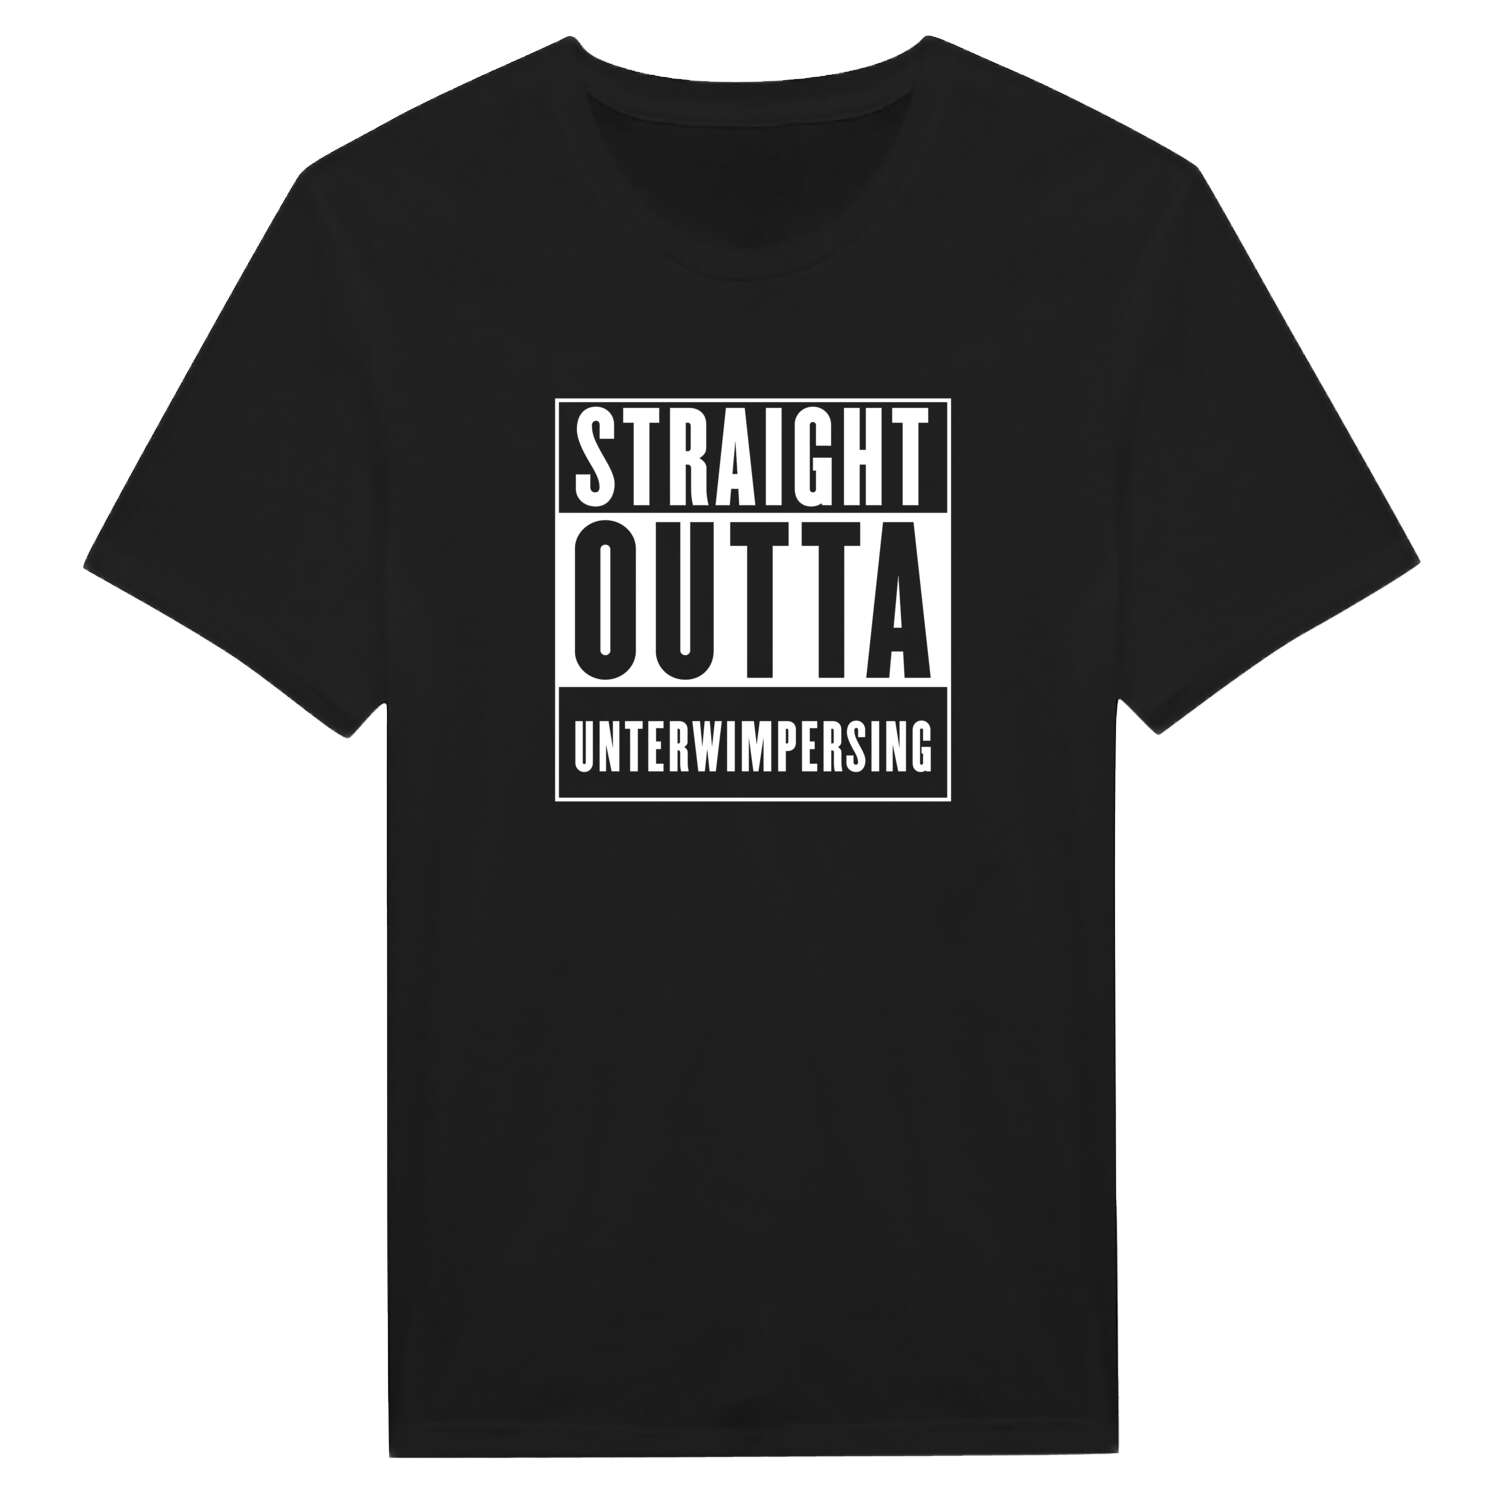 Unterwimpersing T-Shirt »Straight Outta«